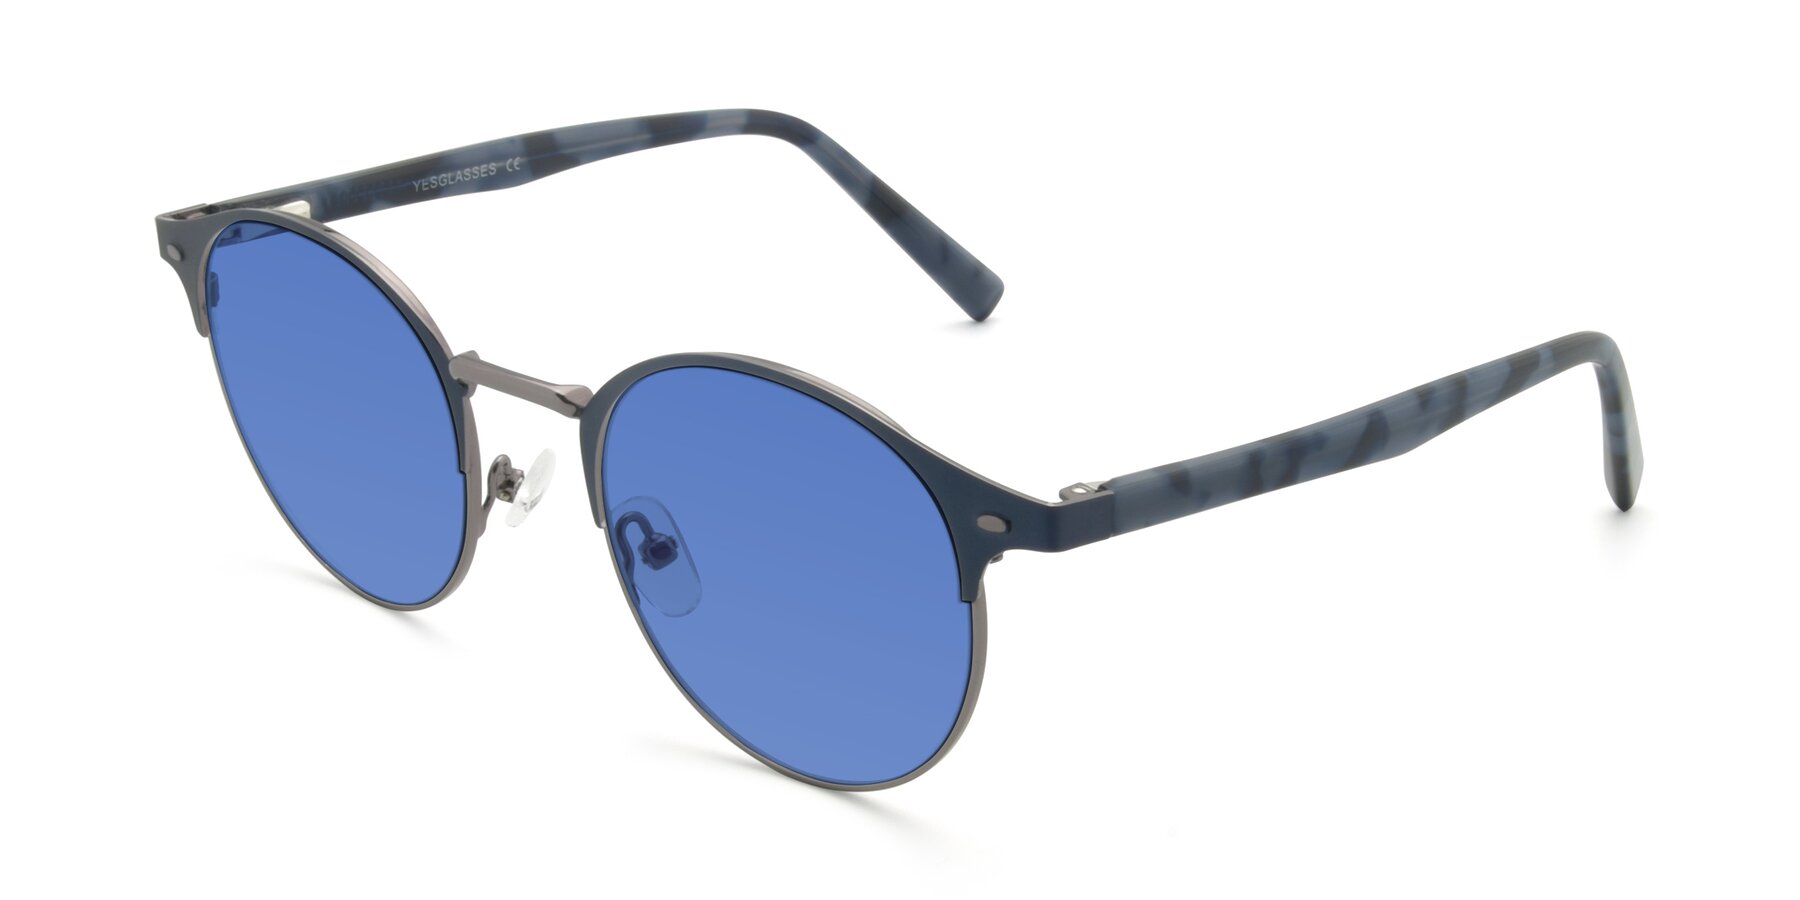 Angle of 9099 in Blue-Gunmetal with Blue Tinted Lenses